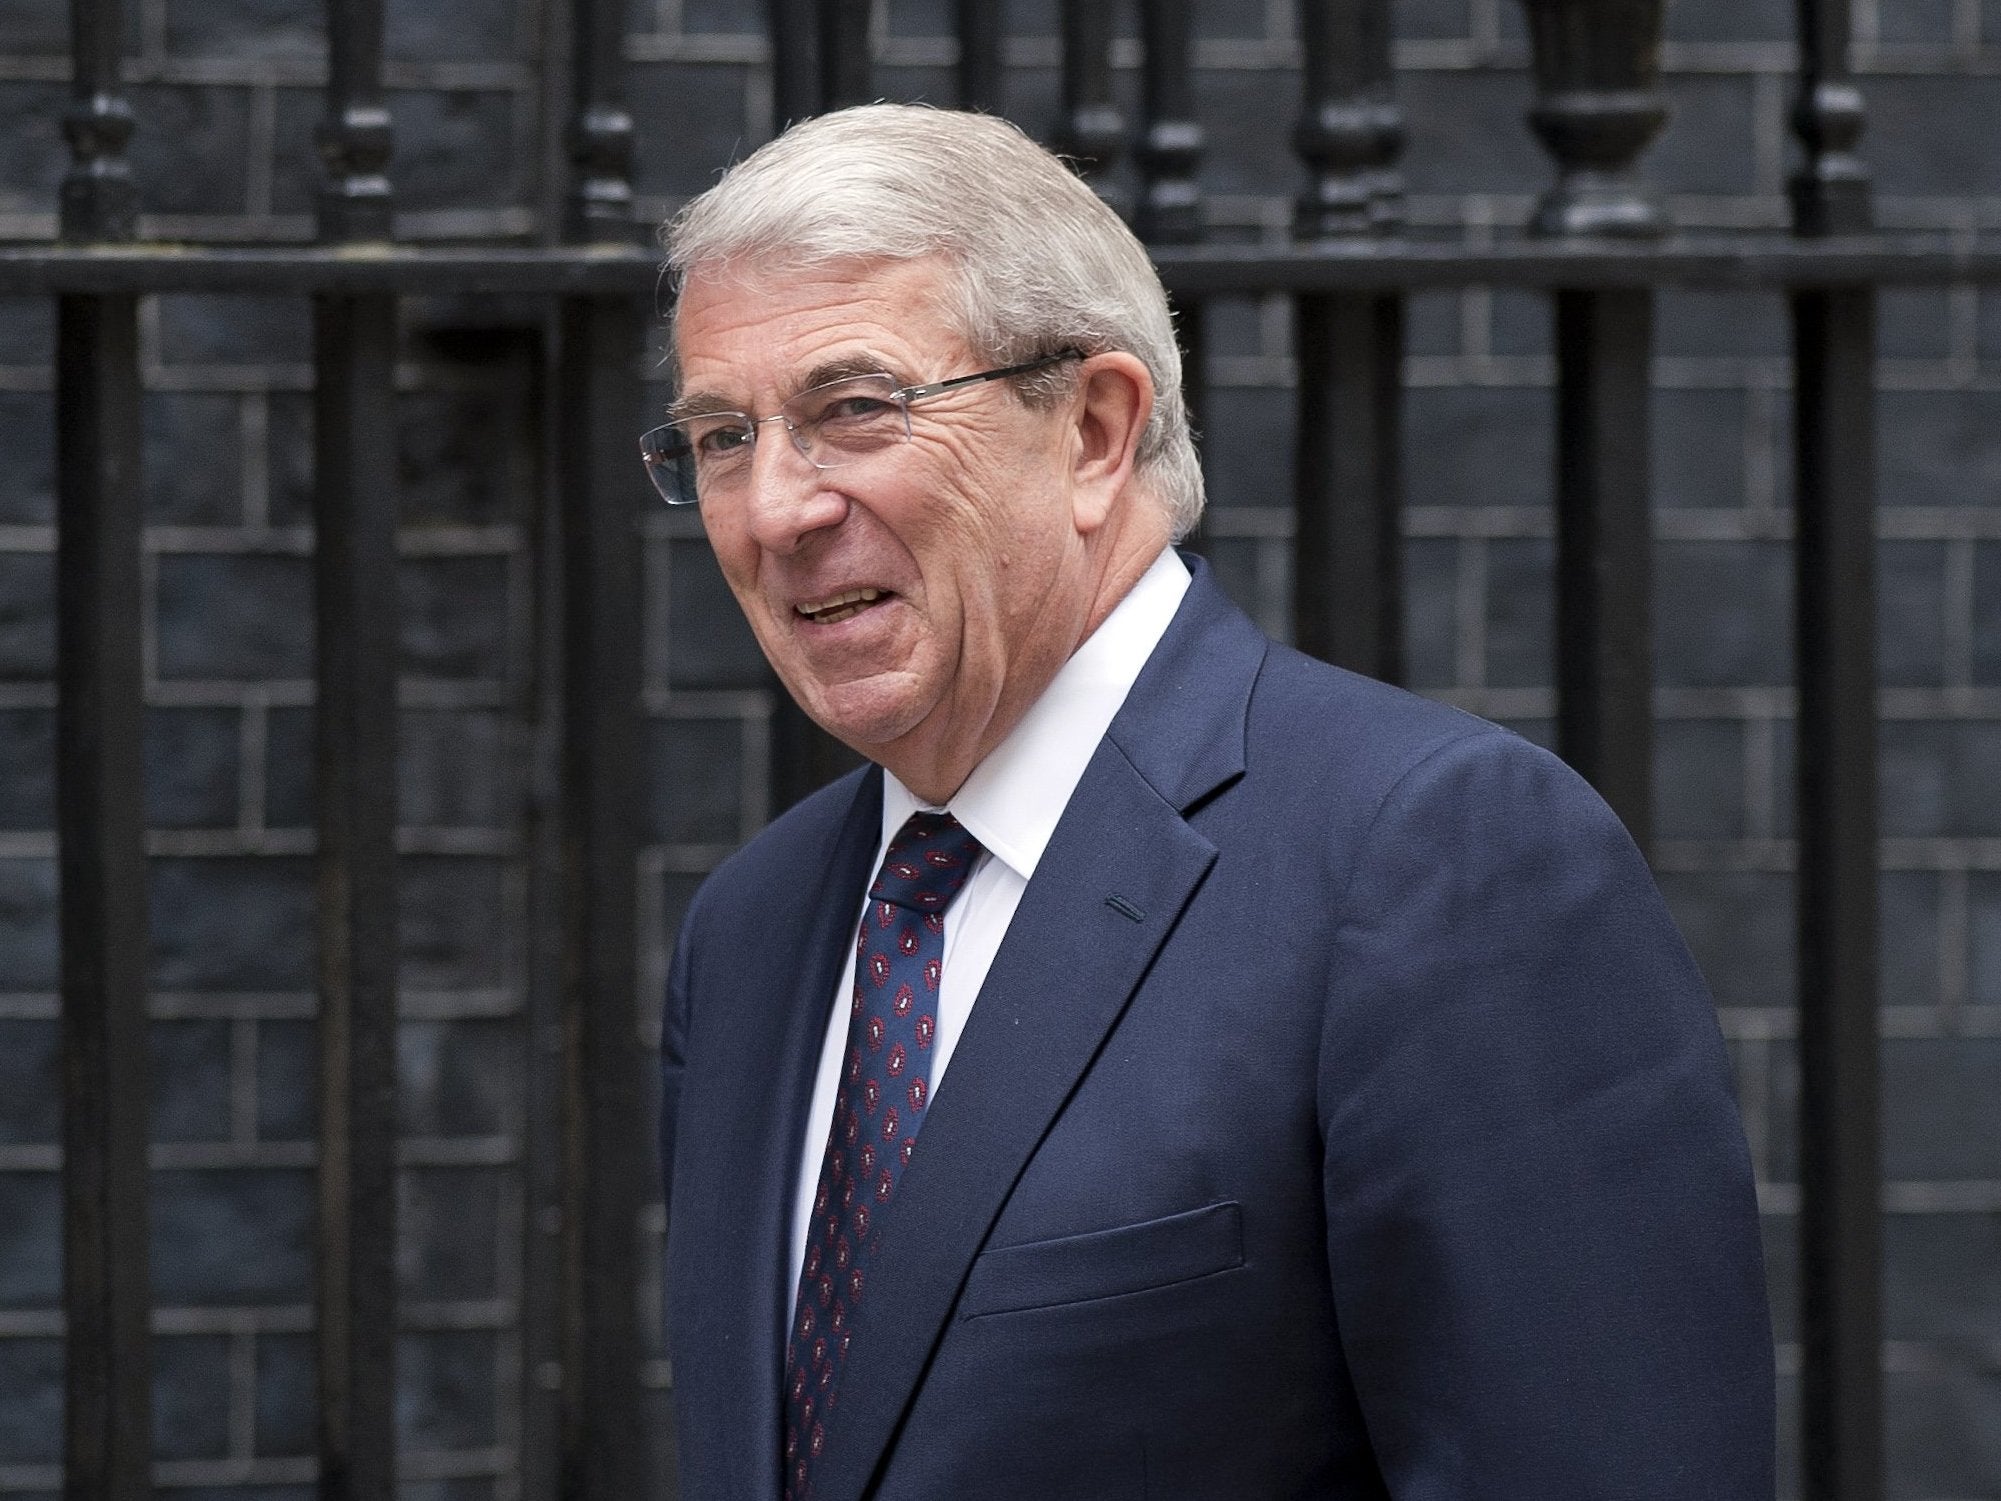 ‘We are a vital part of the wealth-creating machinery,’ says BAE Systems chairman Sir Roger Carr